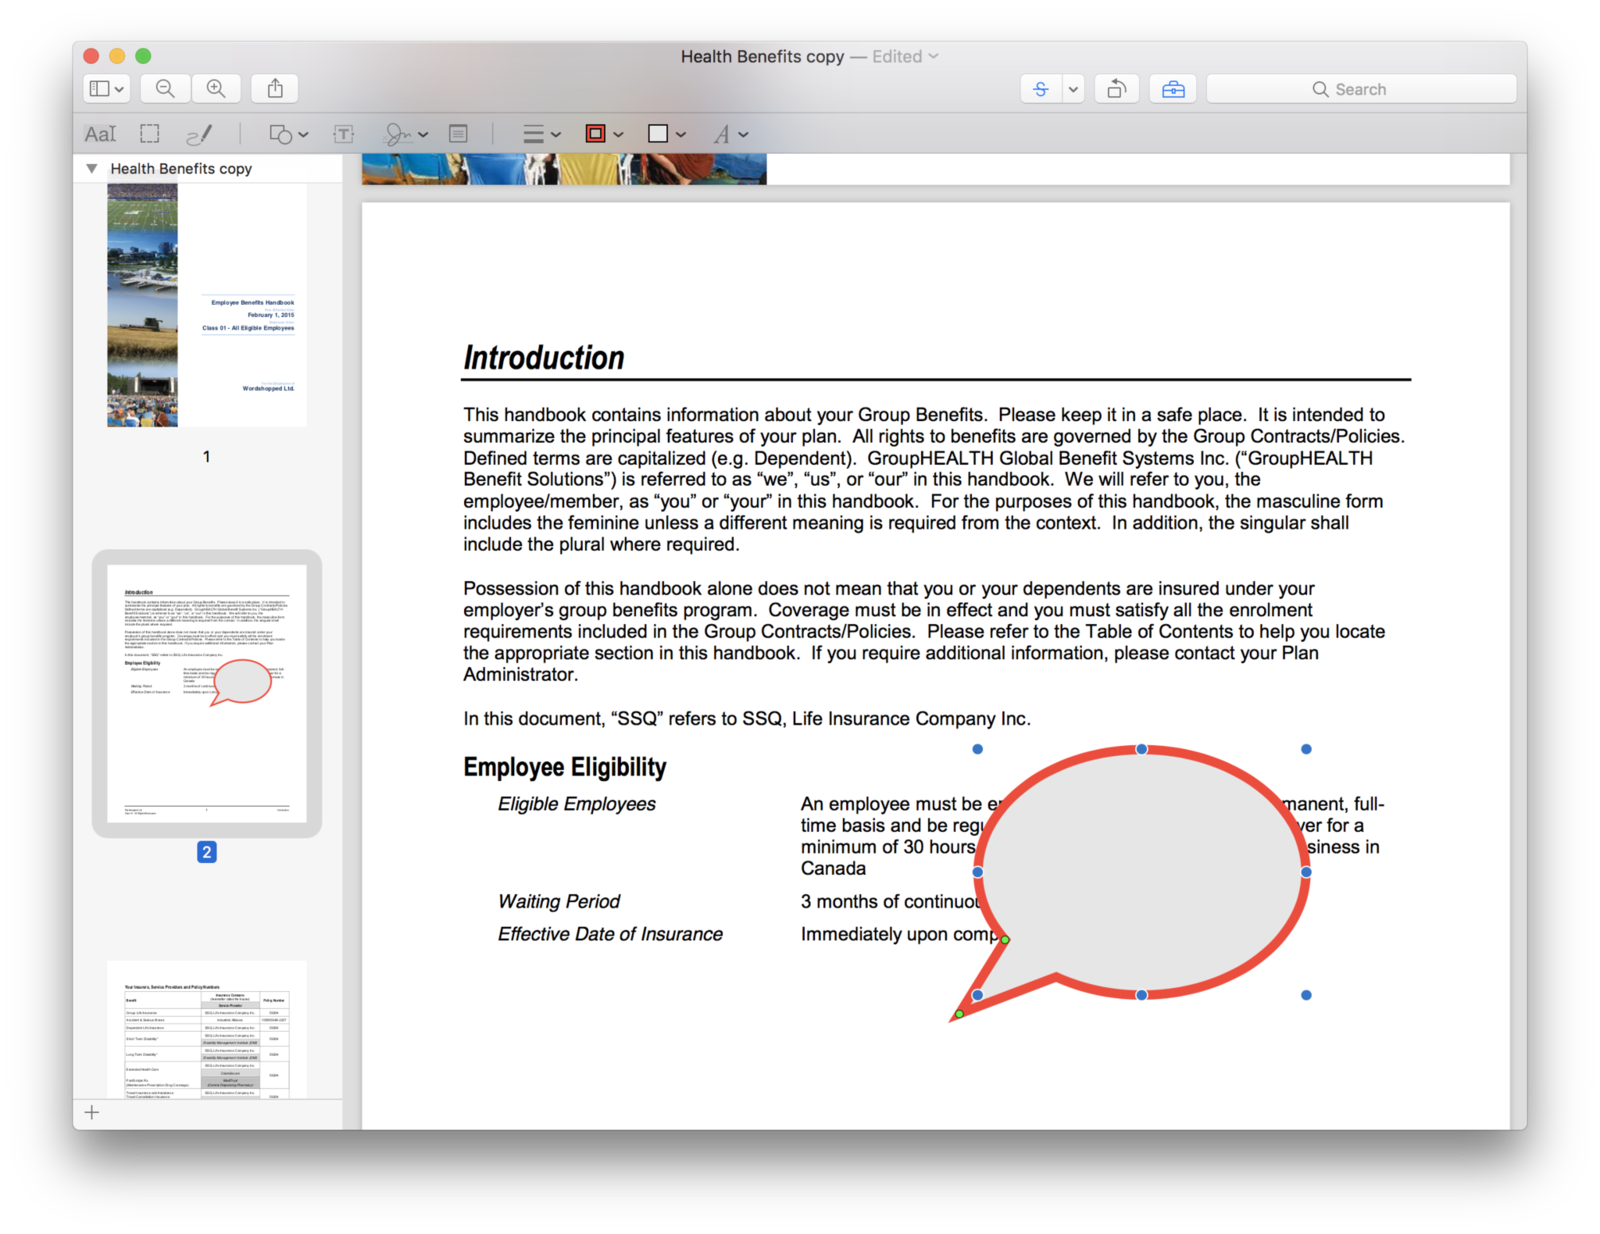 any pdf reader for windows similar to preview on mac